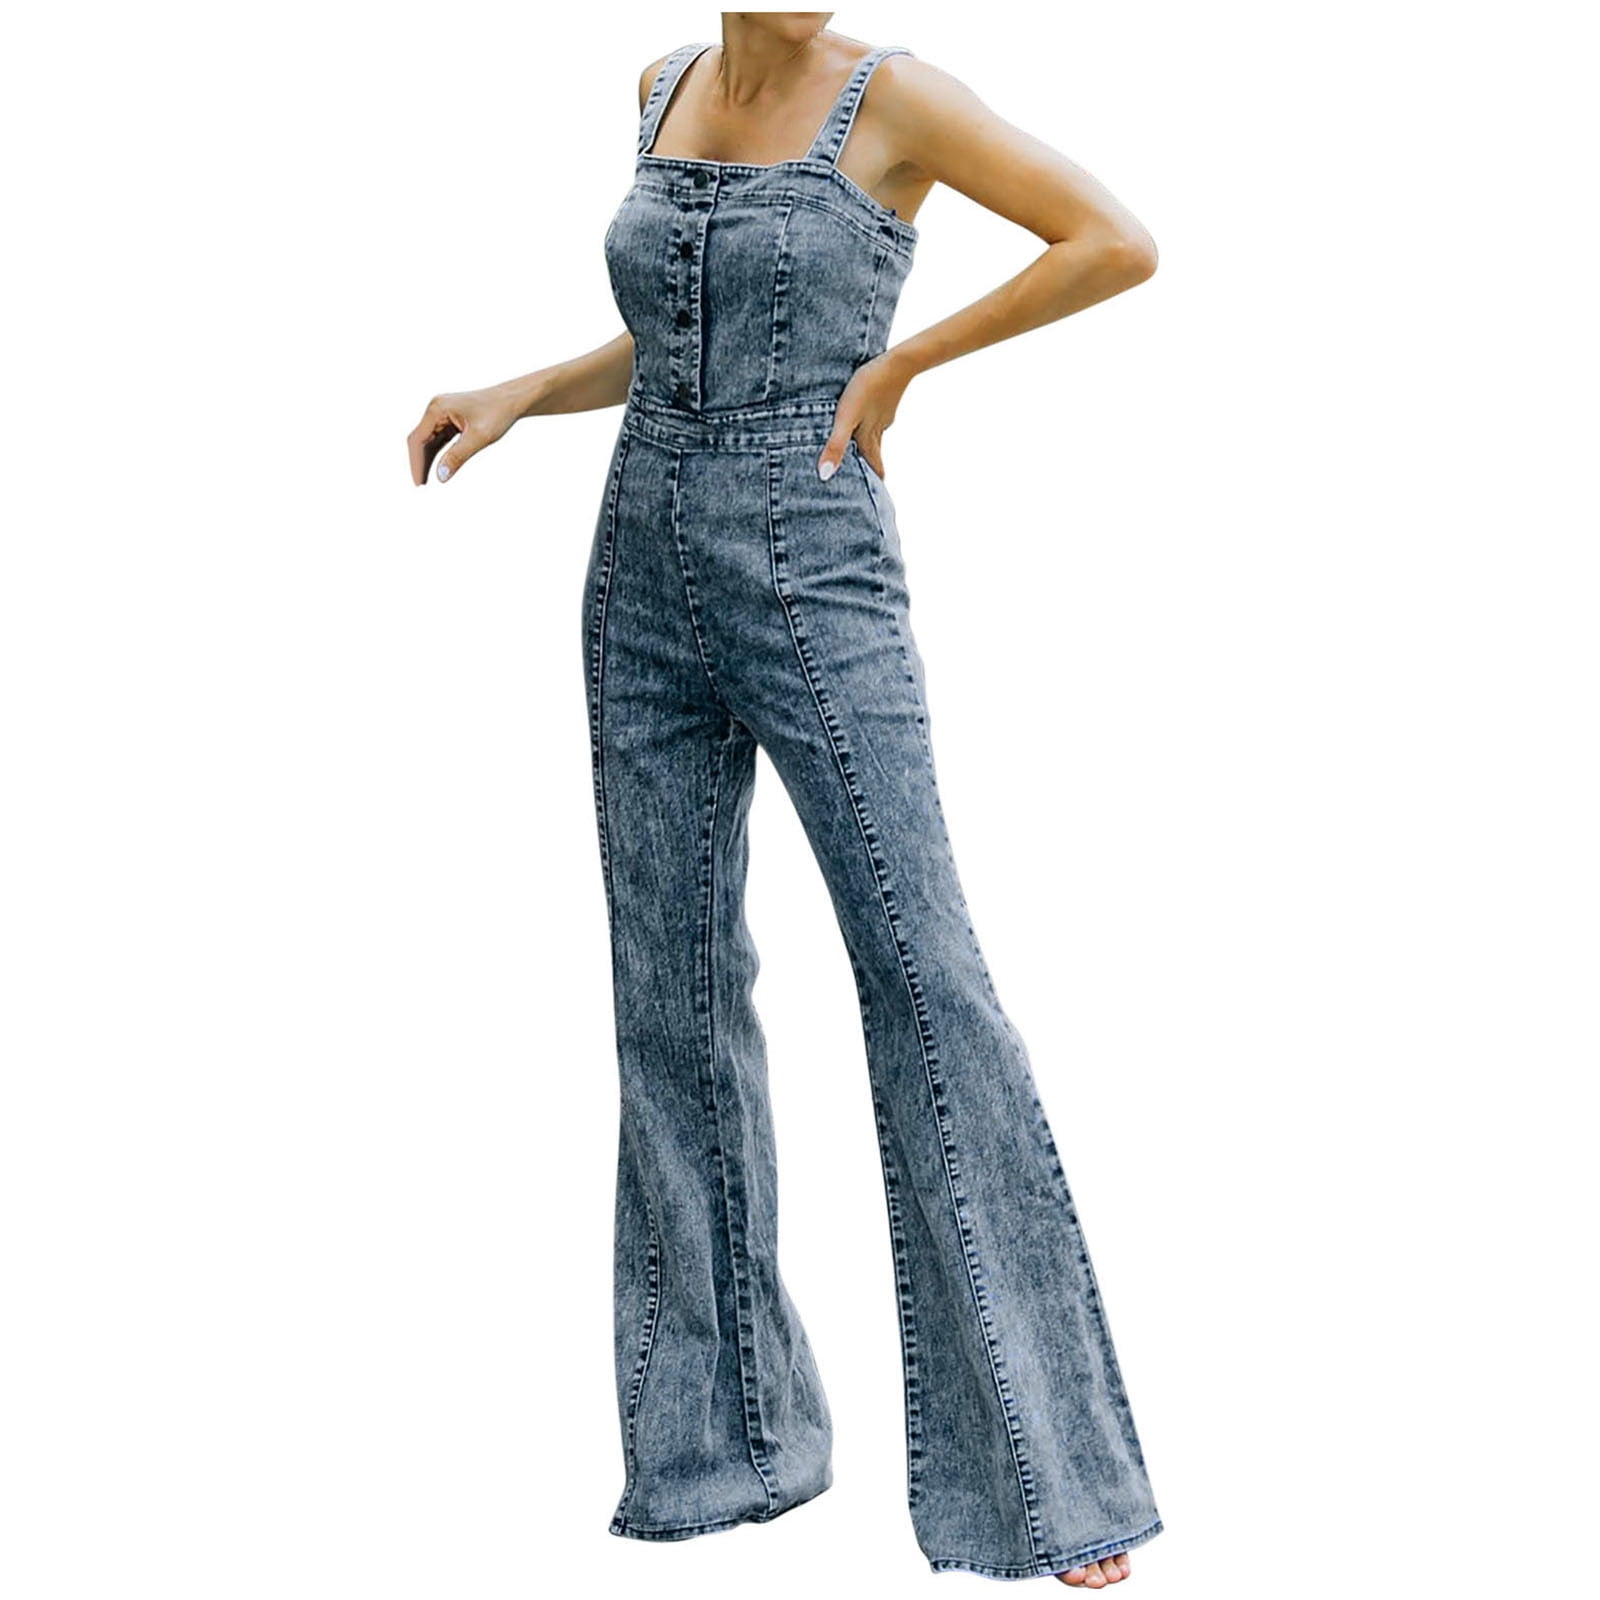 Denim Jumpsuits for Women Solid Washed Stretchy Bell Bottom Pants Romper  Sleeveless Casual Summer Jumpsuit Overalls